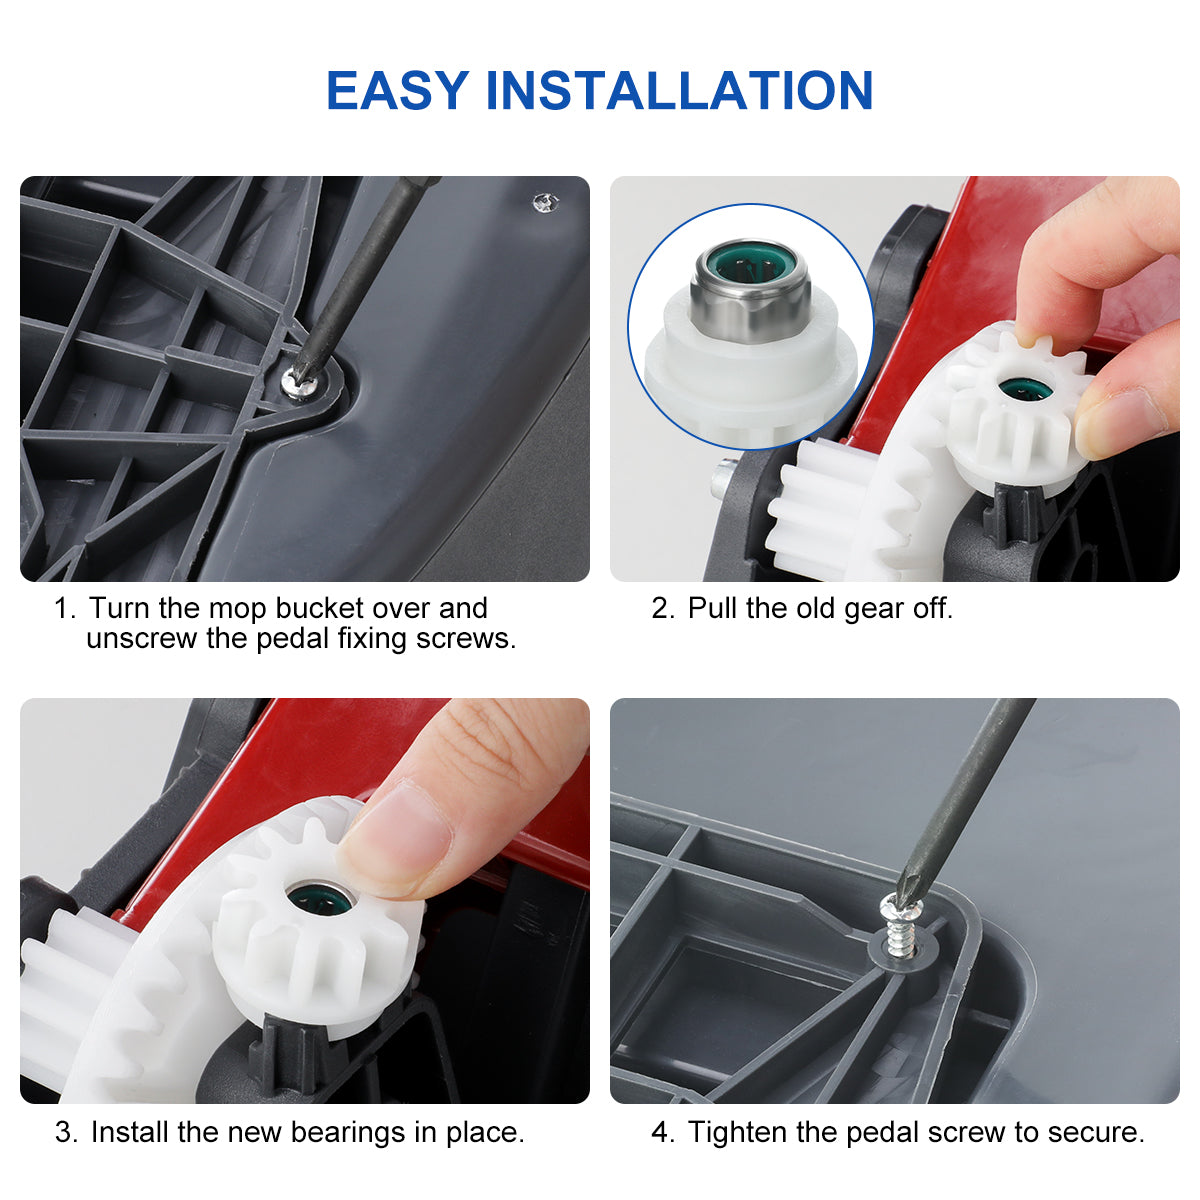 easy installation: turn the mop bucket over and unscrew the pedal fixing screws, pull the old gear off, install the new bearings in place, tighten the pedal screw to secure.